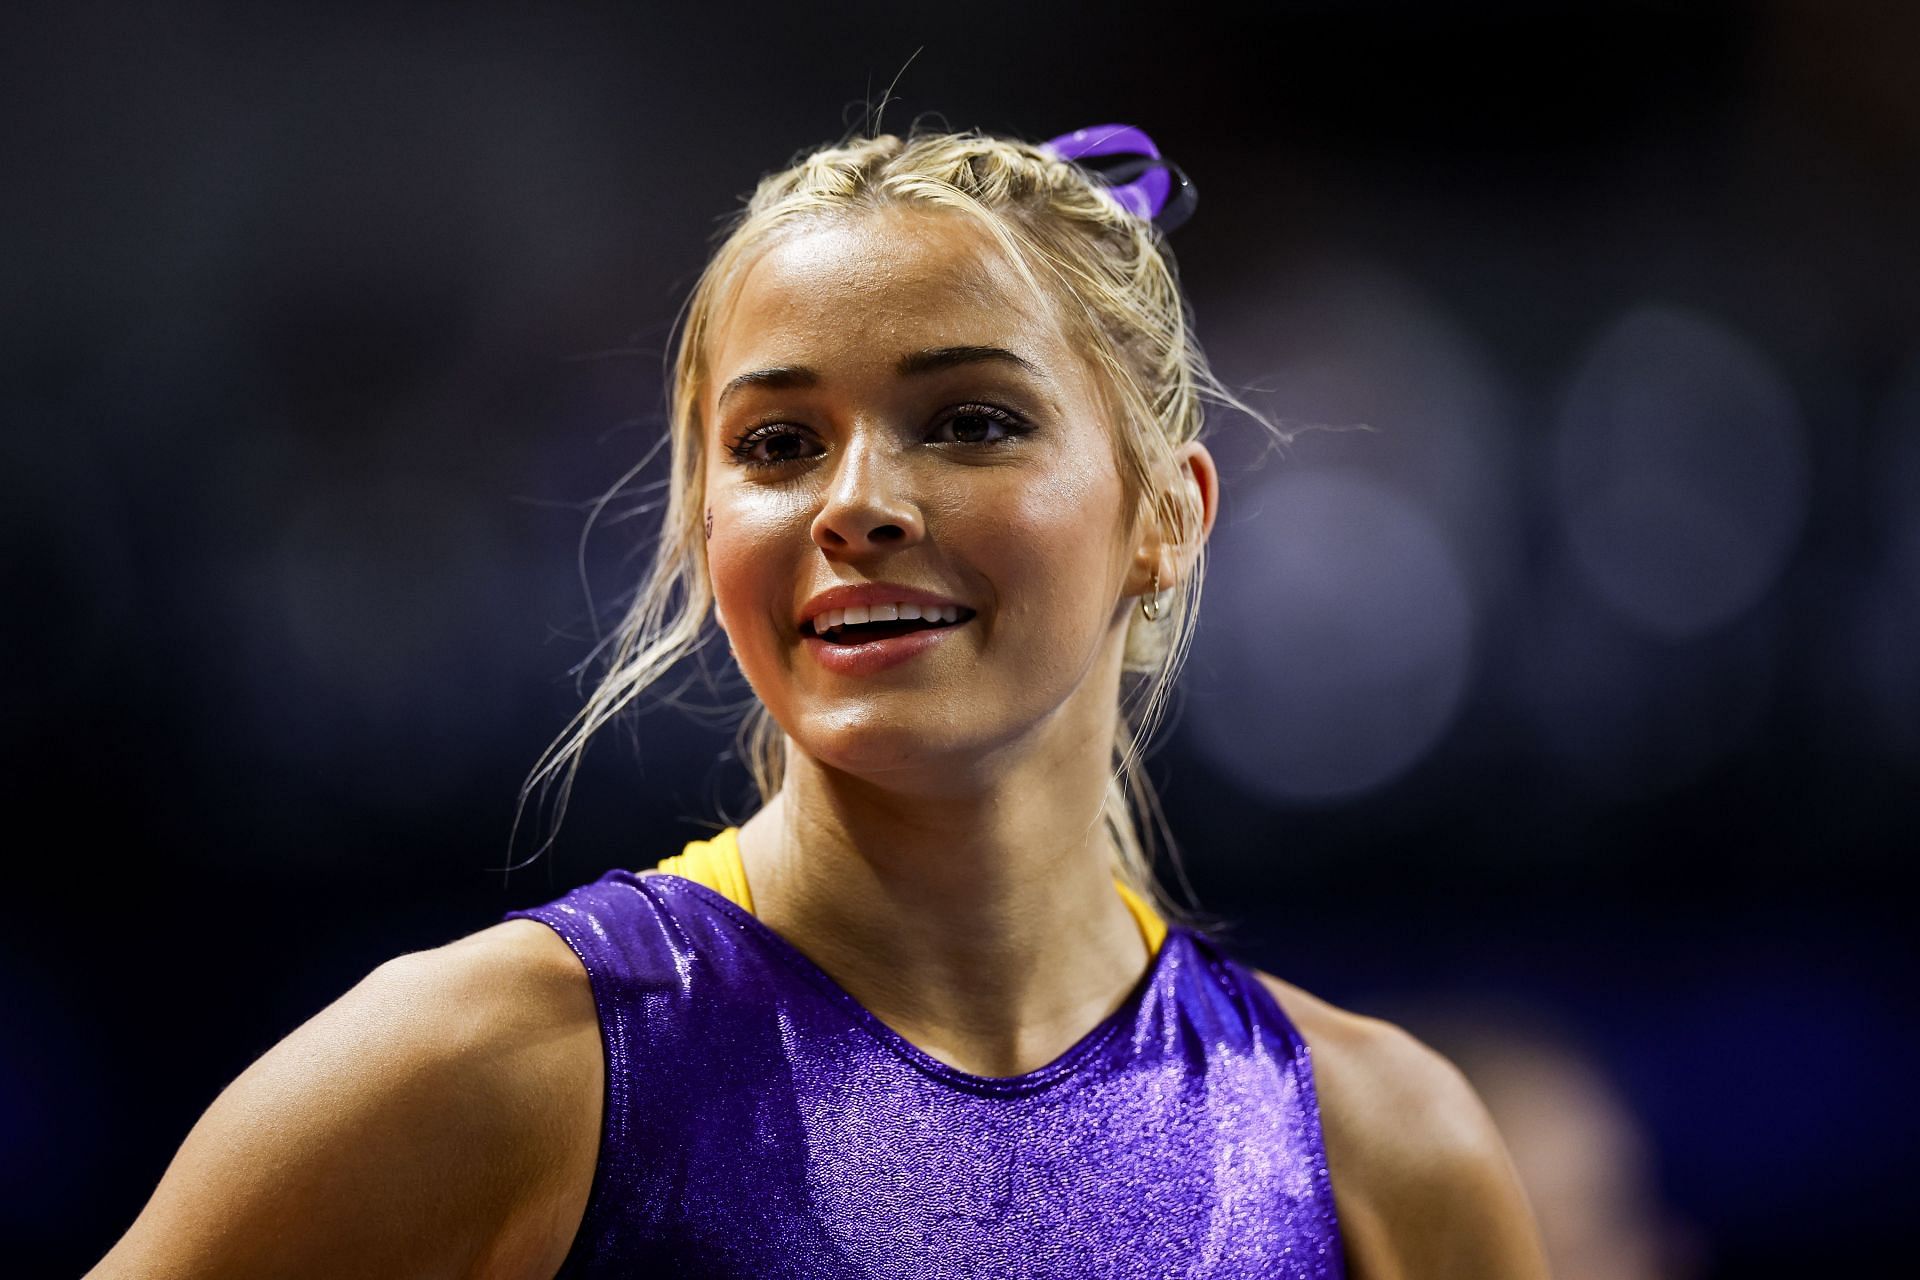 Olivia Dunne recently clinched LSU&rsquo;s fifth SEC championship, which tied the program&rsquo;s best score at the championships under the direction of coach Jay Clark and Dunne&rsquo;s teammate Haleigh Bryant.